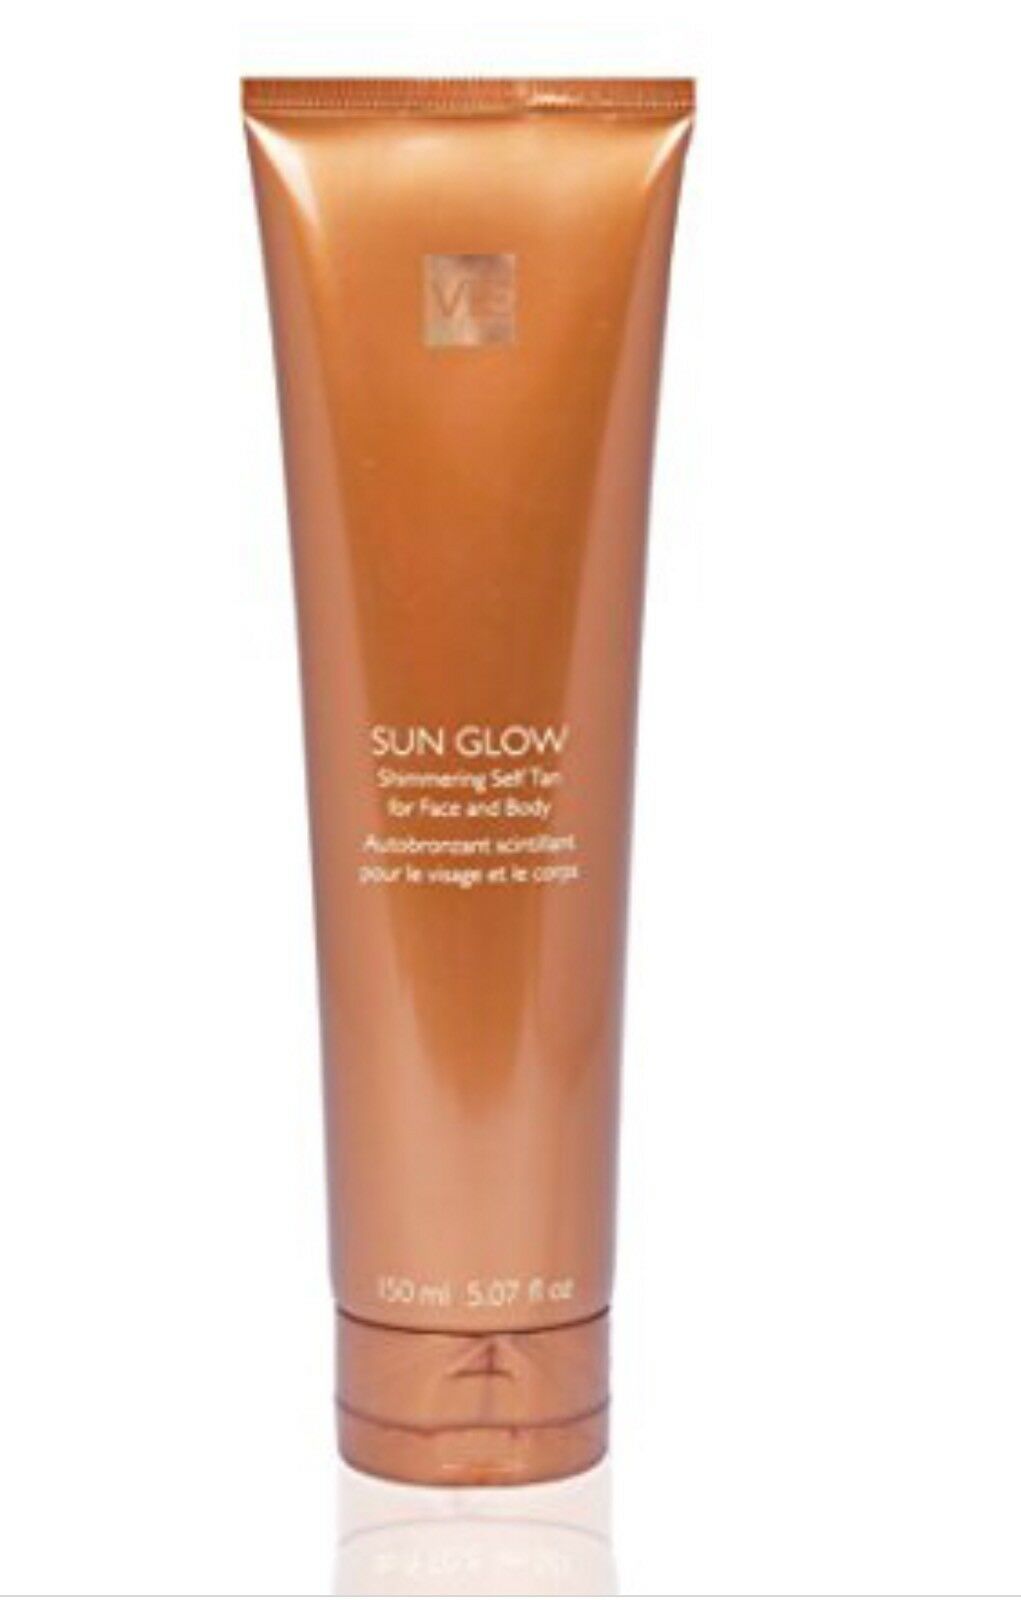 VIE Sun Glow Shimmering self tan for face and Body